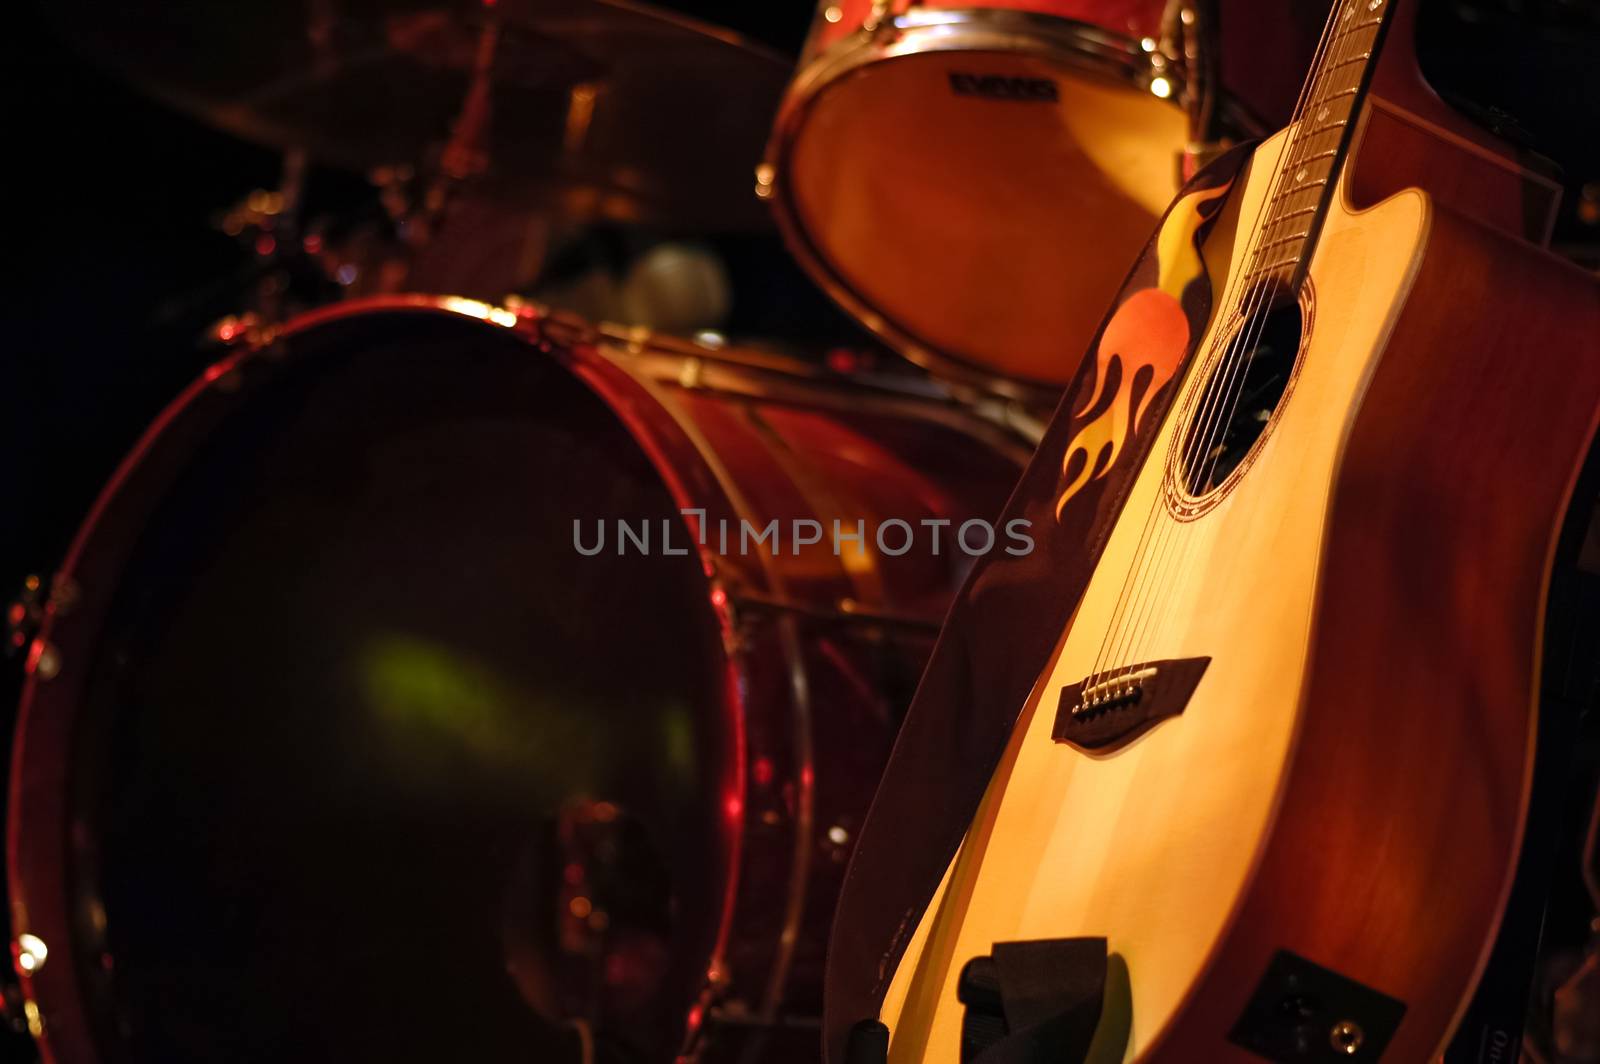 acoustic guitar and drums on stage